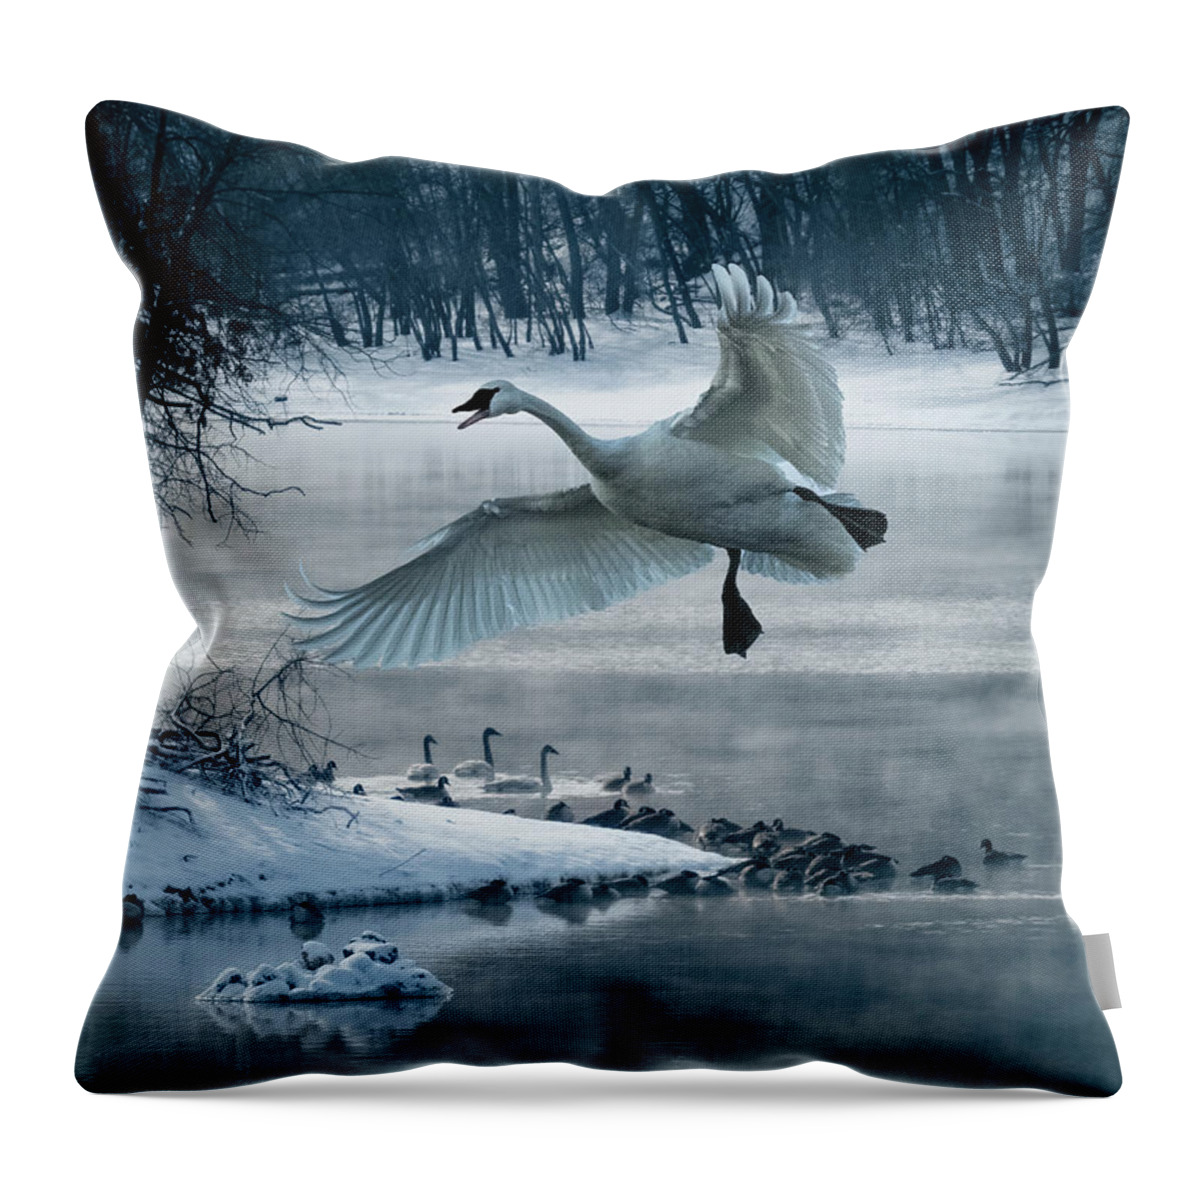 Swan Throw Pillow featuring the photograph Trumpeter Swan Fly By by Patti Deters